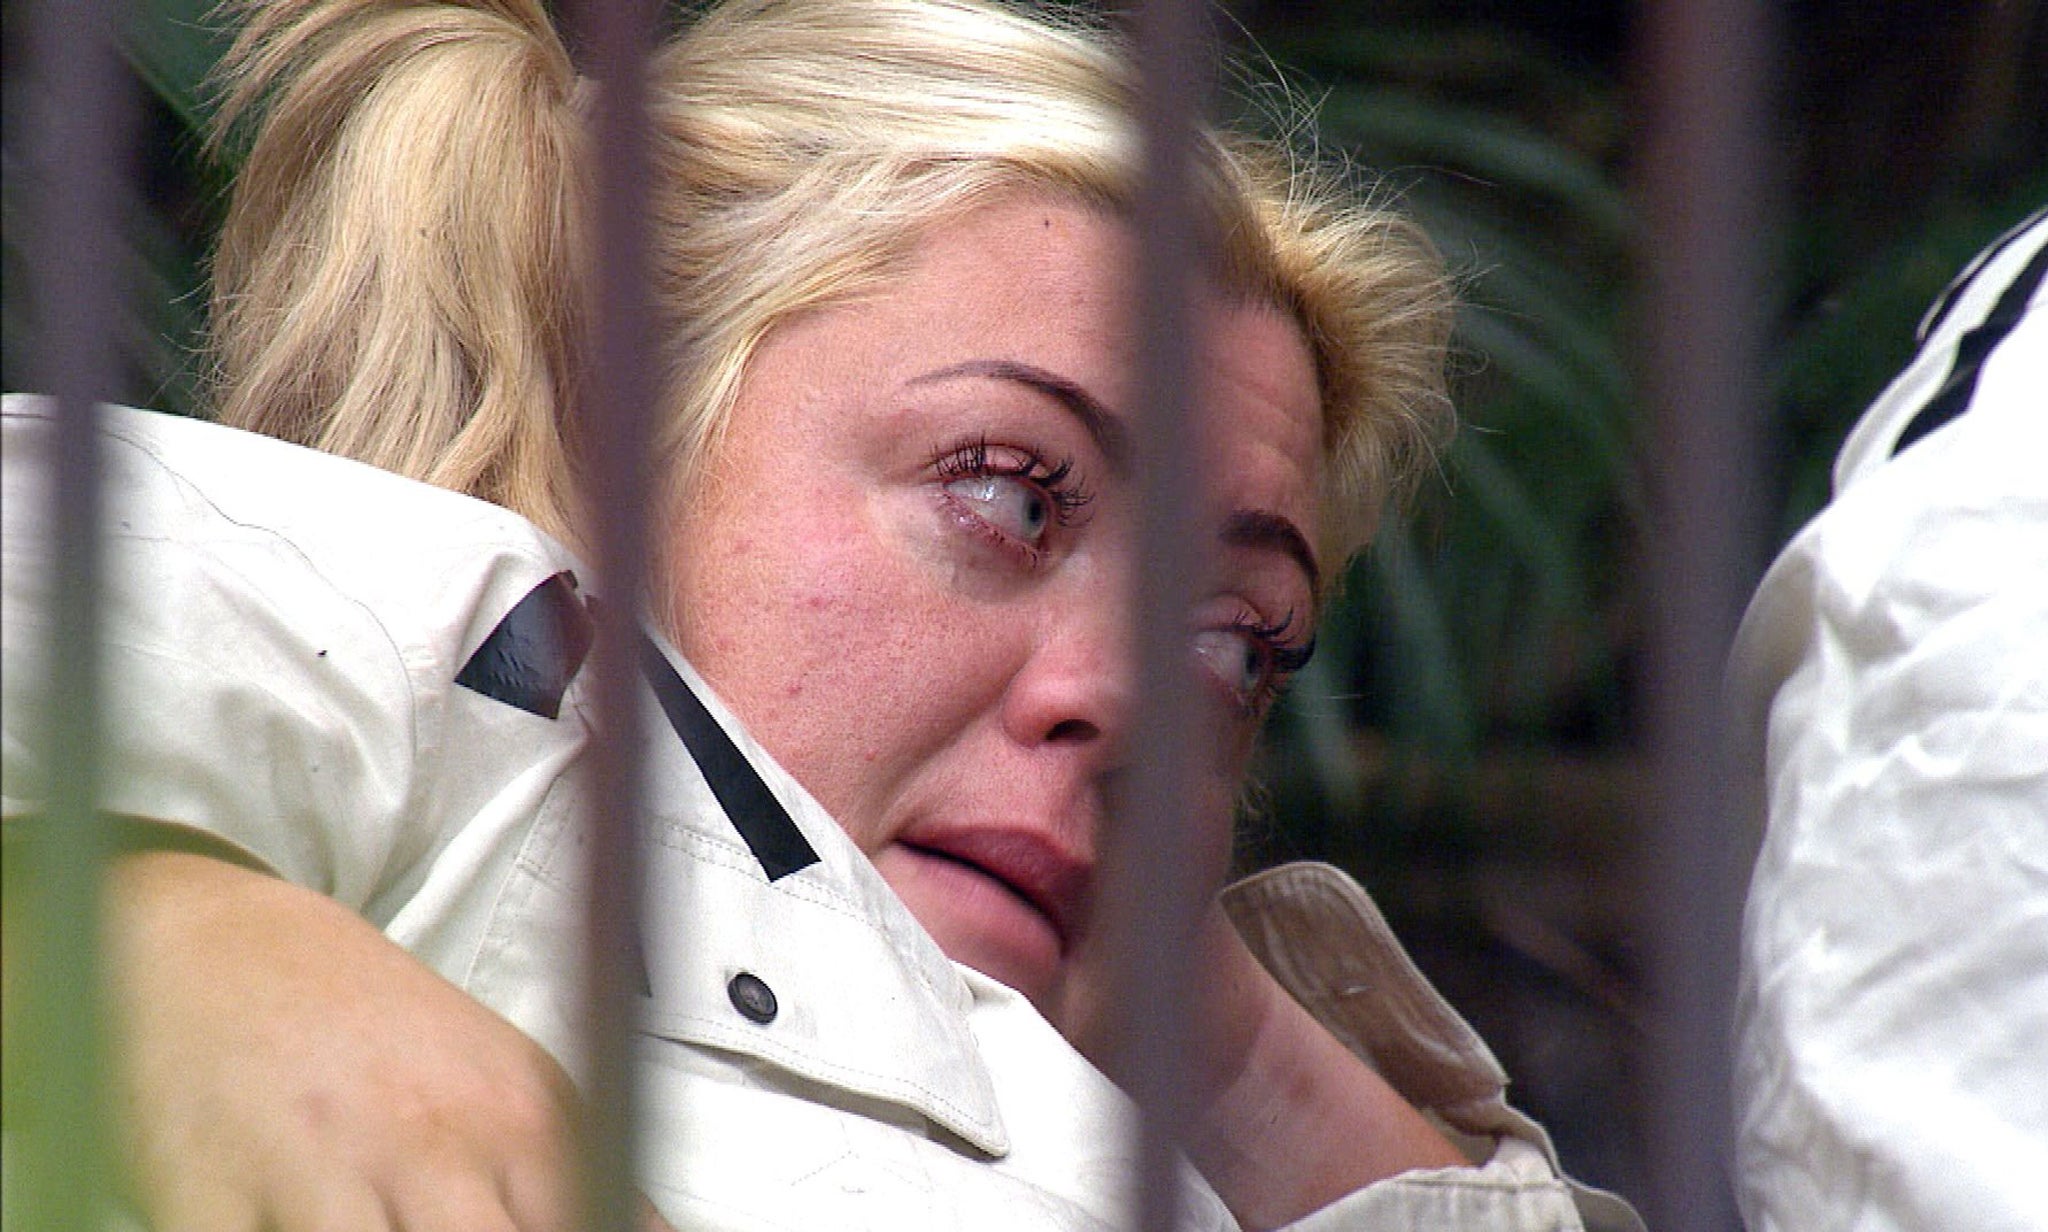 Gemma Collins decides to quit (again) in I'm A Celebrity